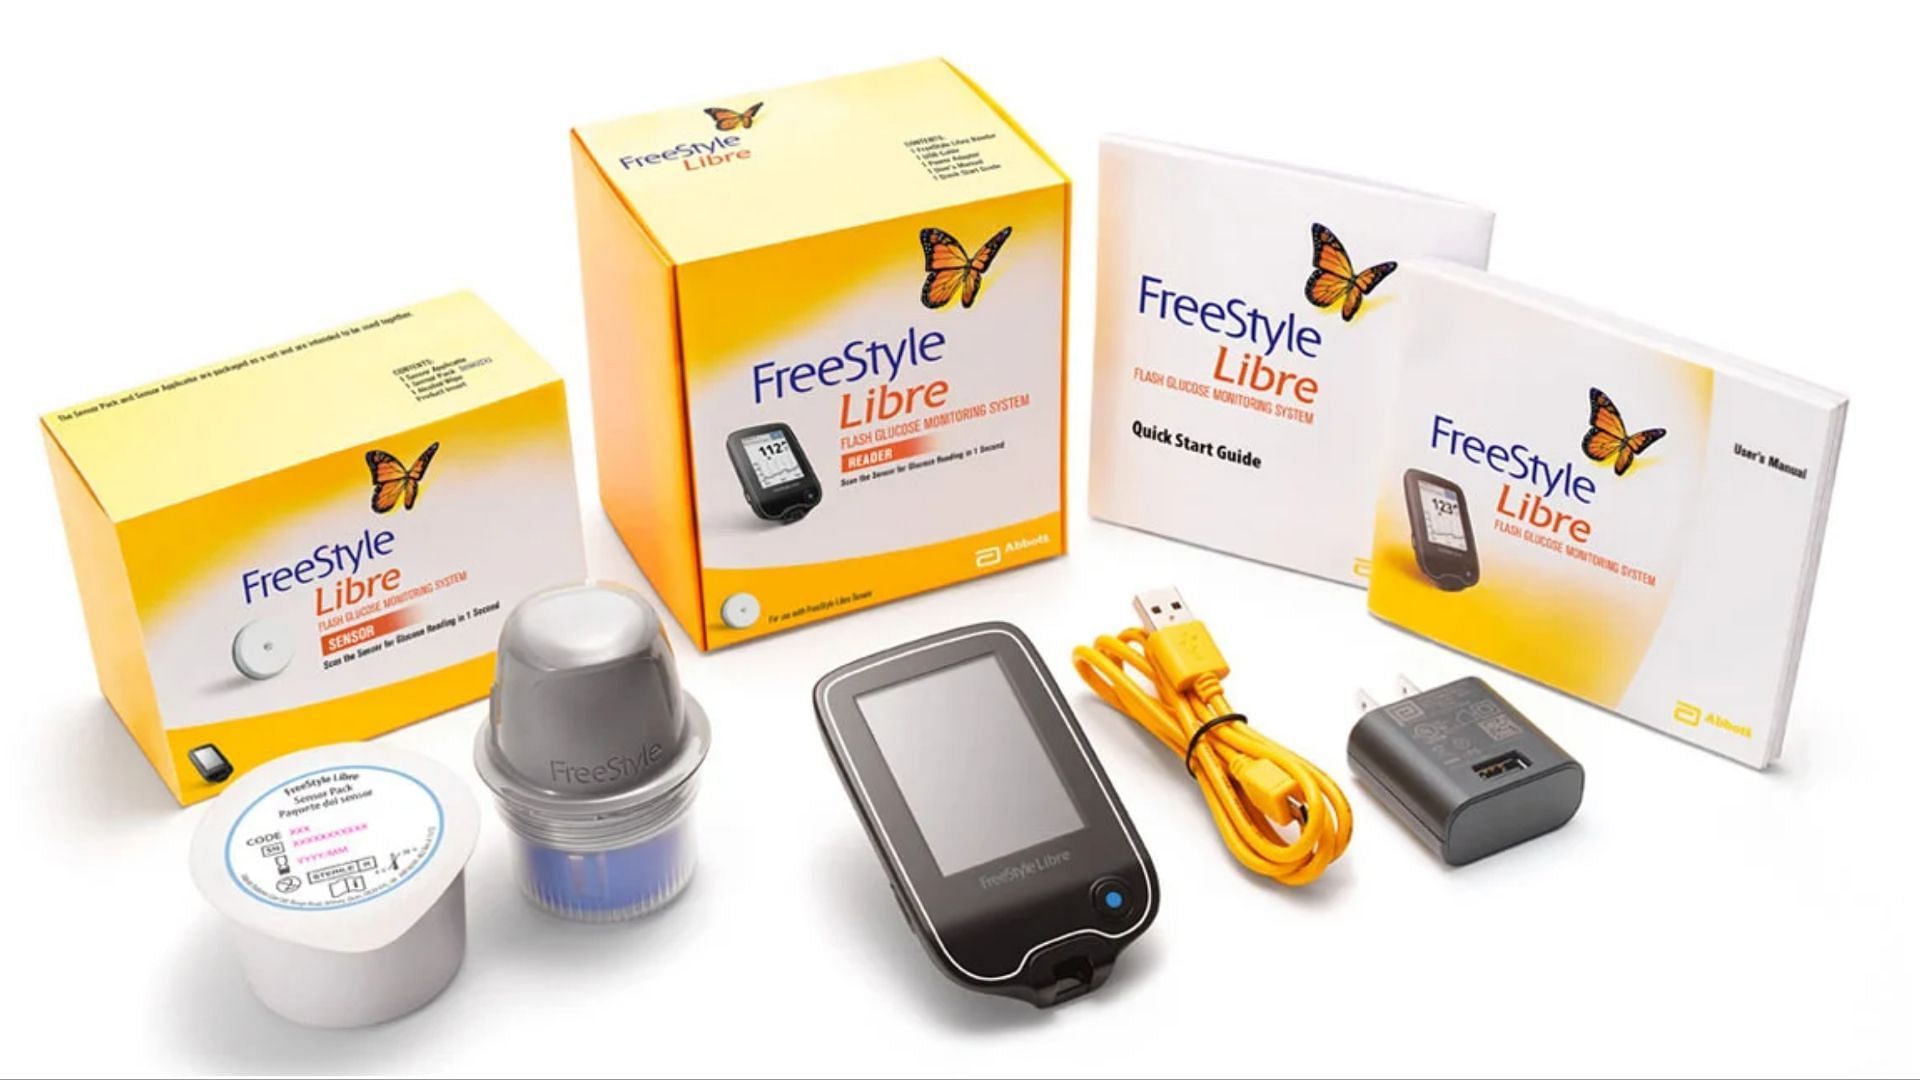 Abbott issues a correction to emphasize on safe usage instructions for its Freestyle Libre Readers (Image via Abbott Freestyle)